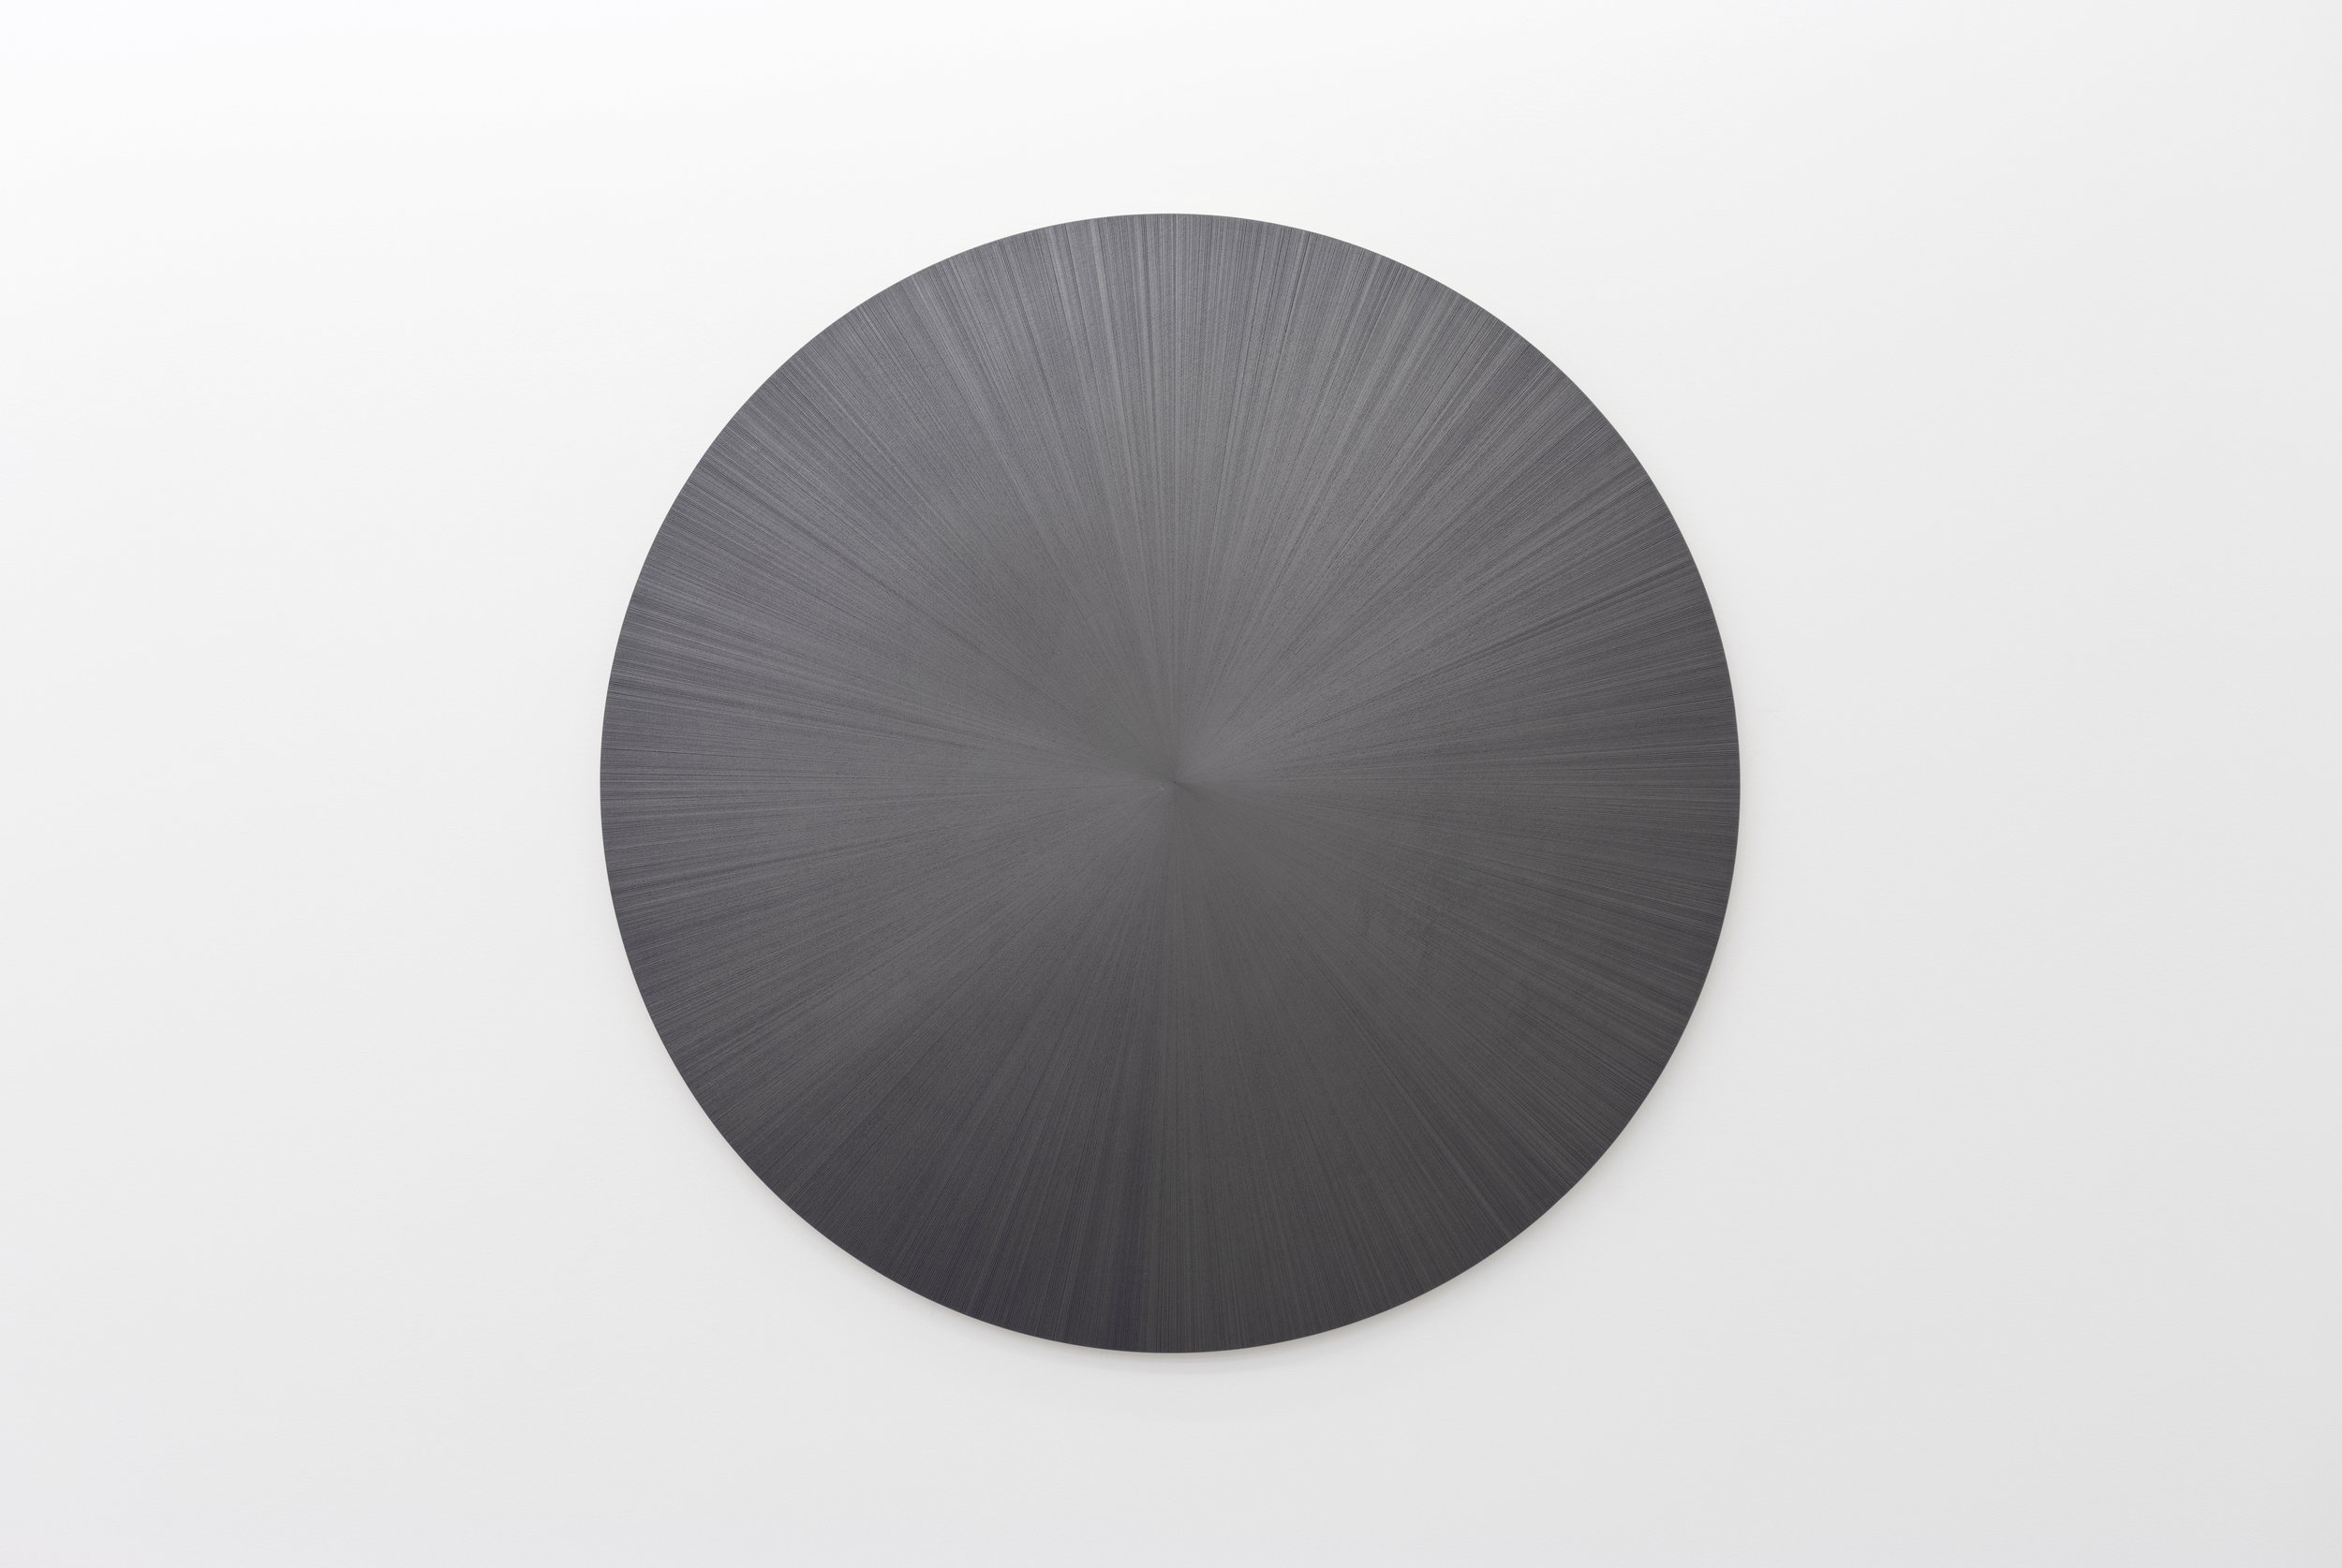   Untitled , 2022   graphite on panel   60 x 60 in 